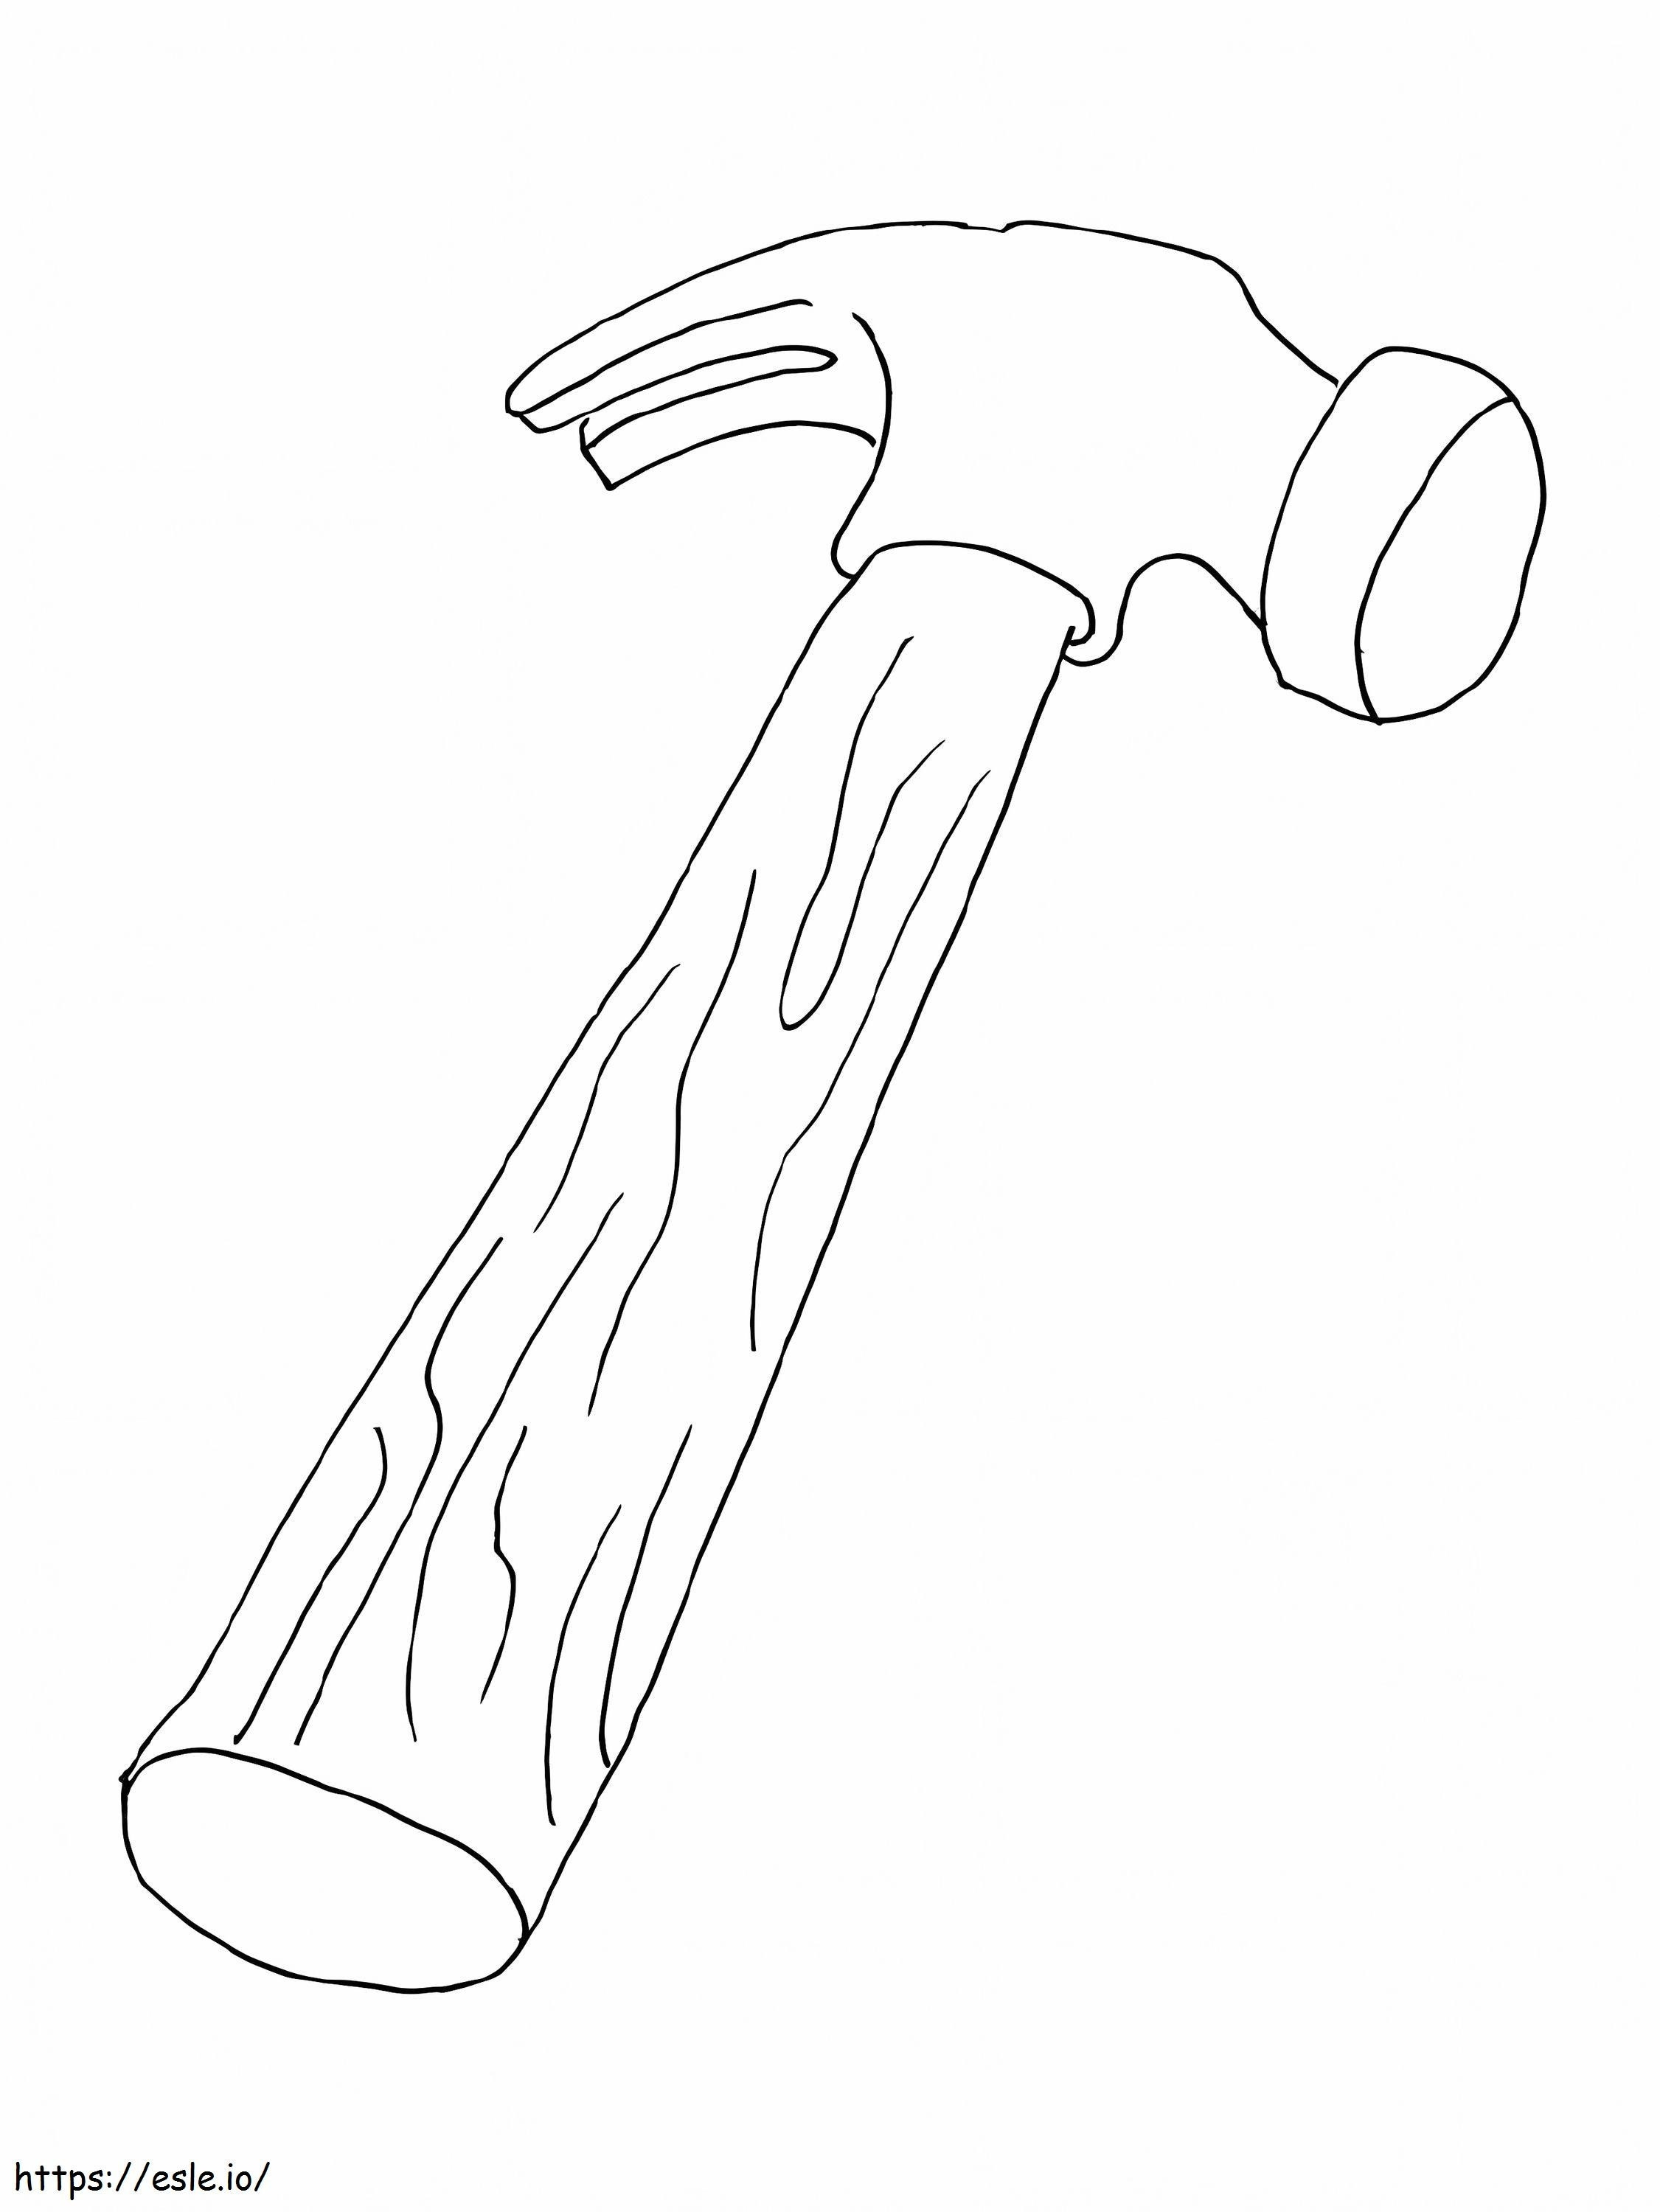 A Hammer coloring page